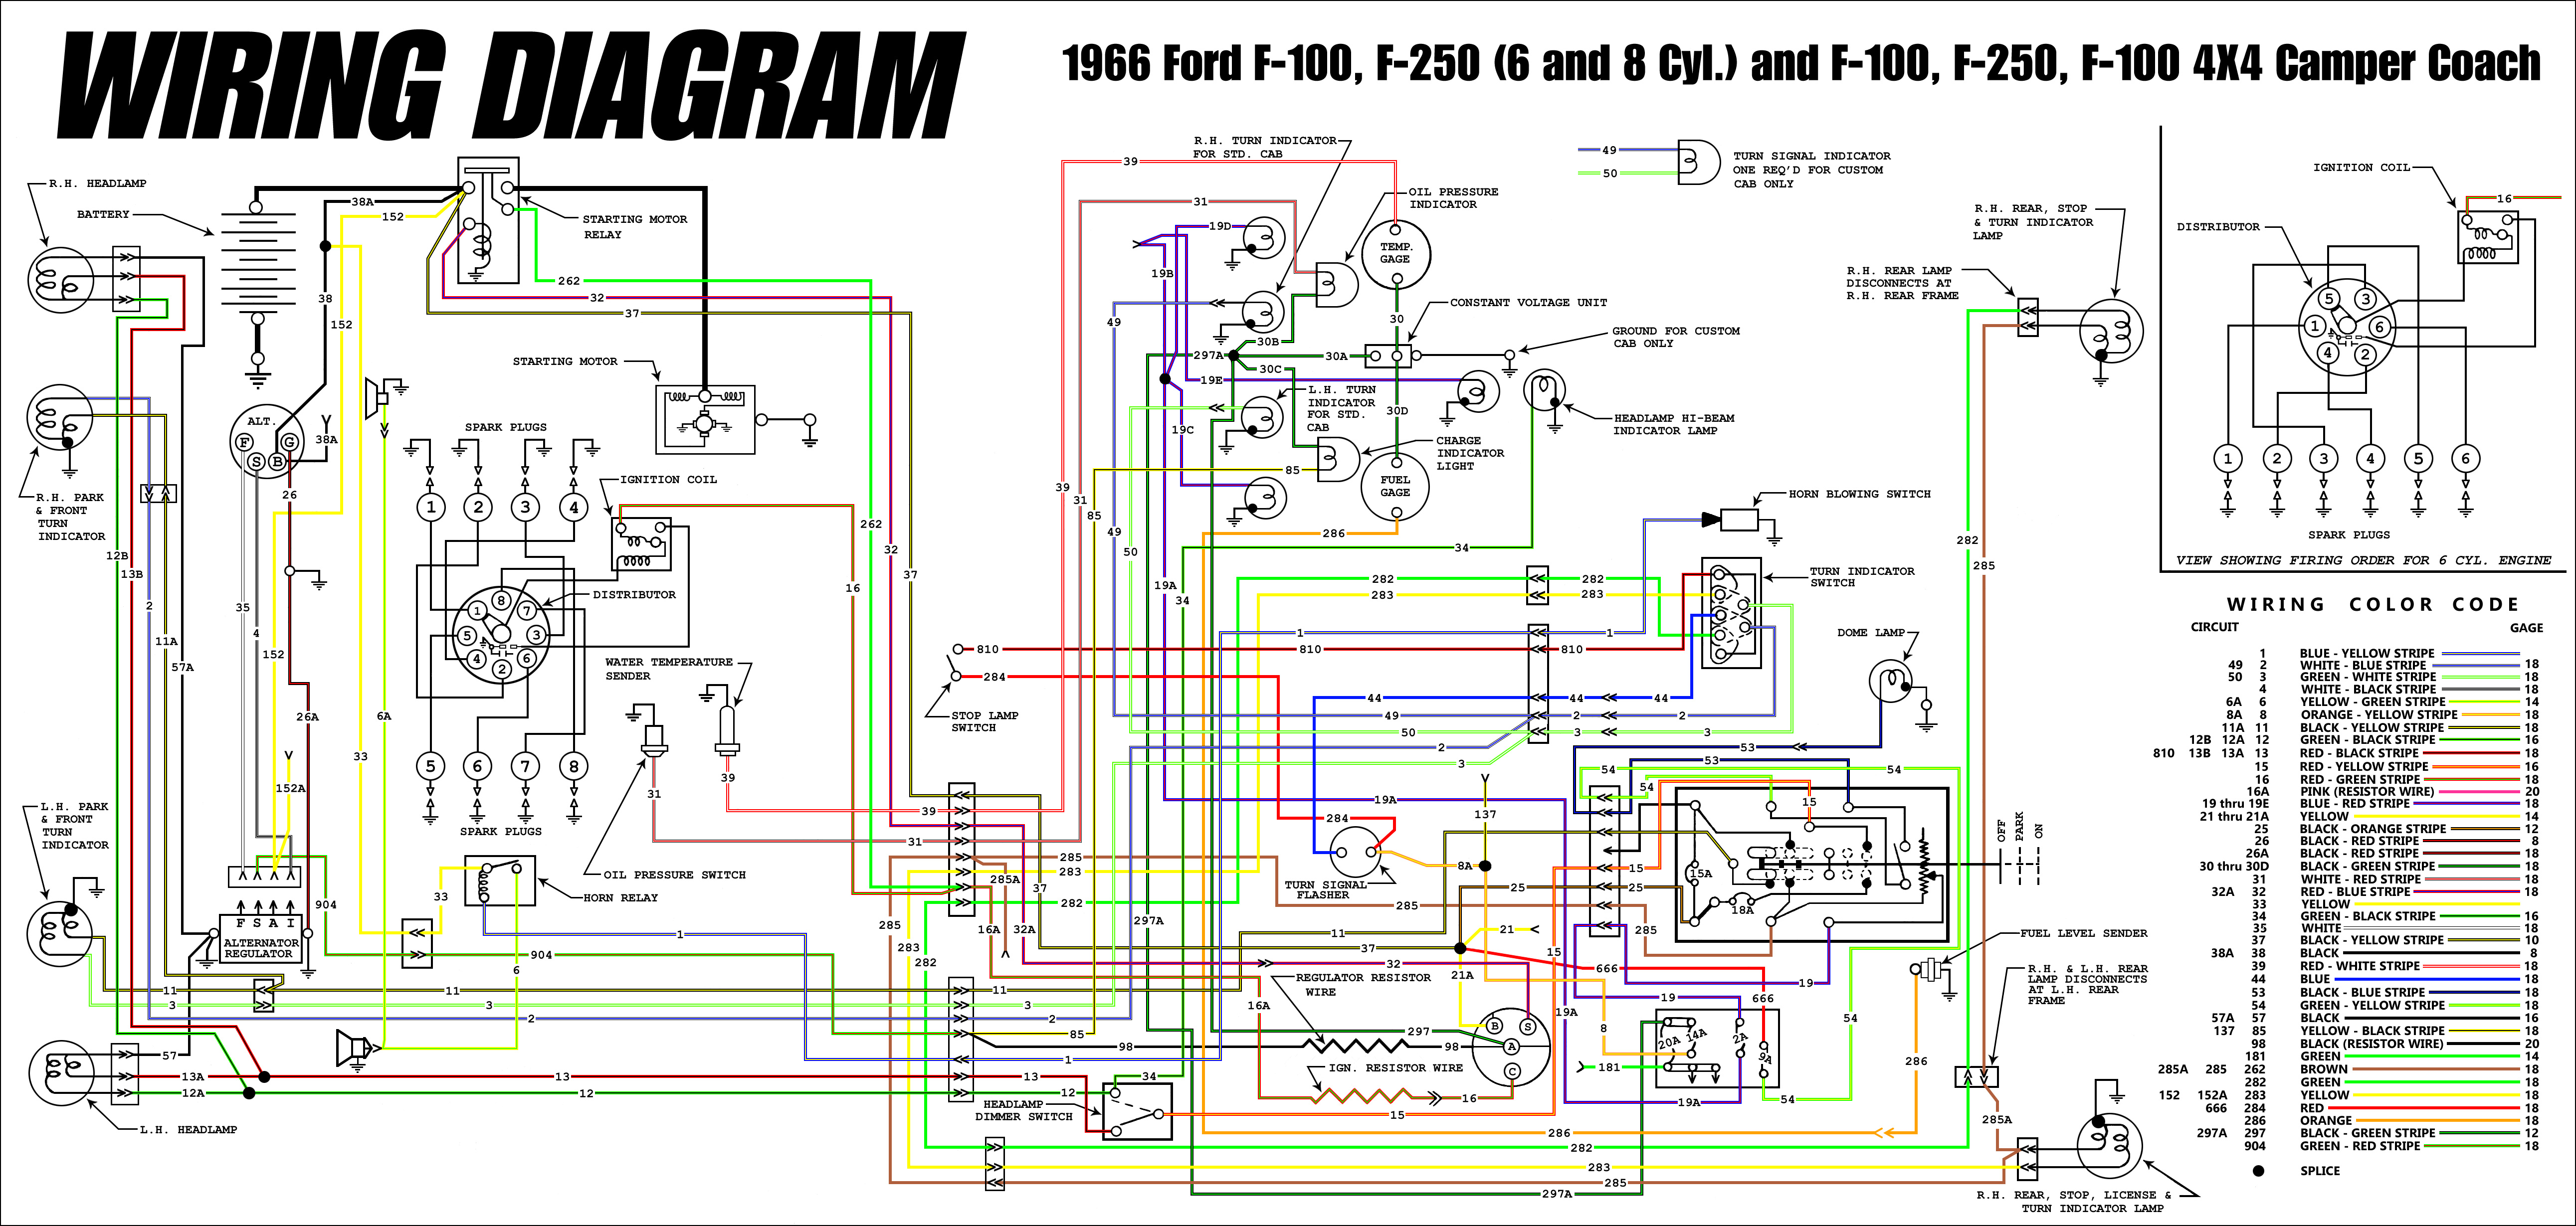 66 f100 cab light wiring - Ford Truck Enthusiasts Forums 1953 ford f100 wiring schematics 